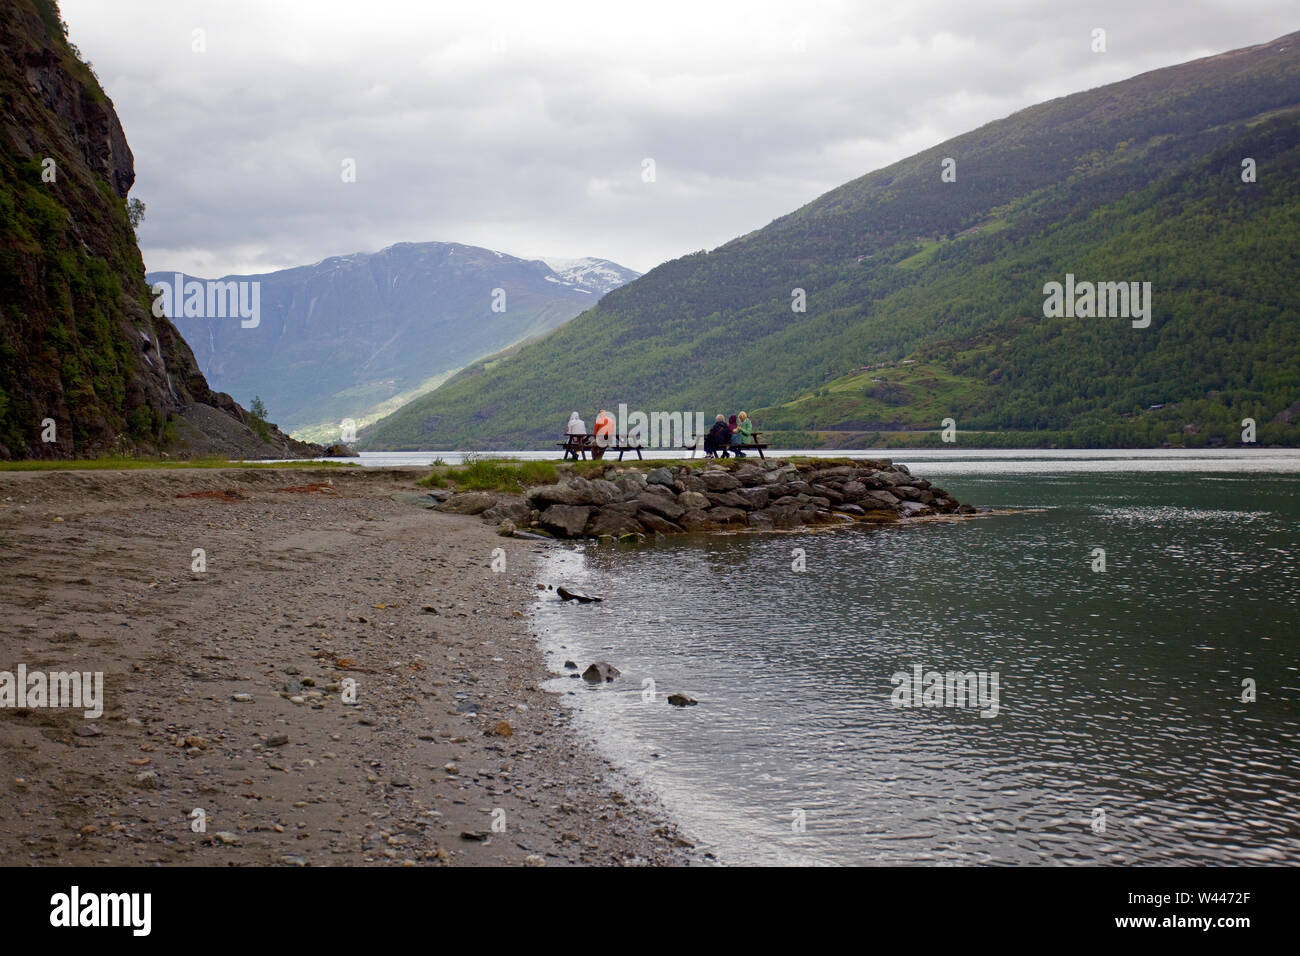 Flam beach looking out onto the fjords, Norway Stock Photo